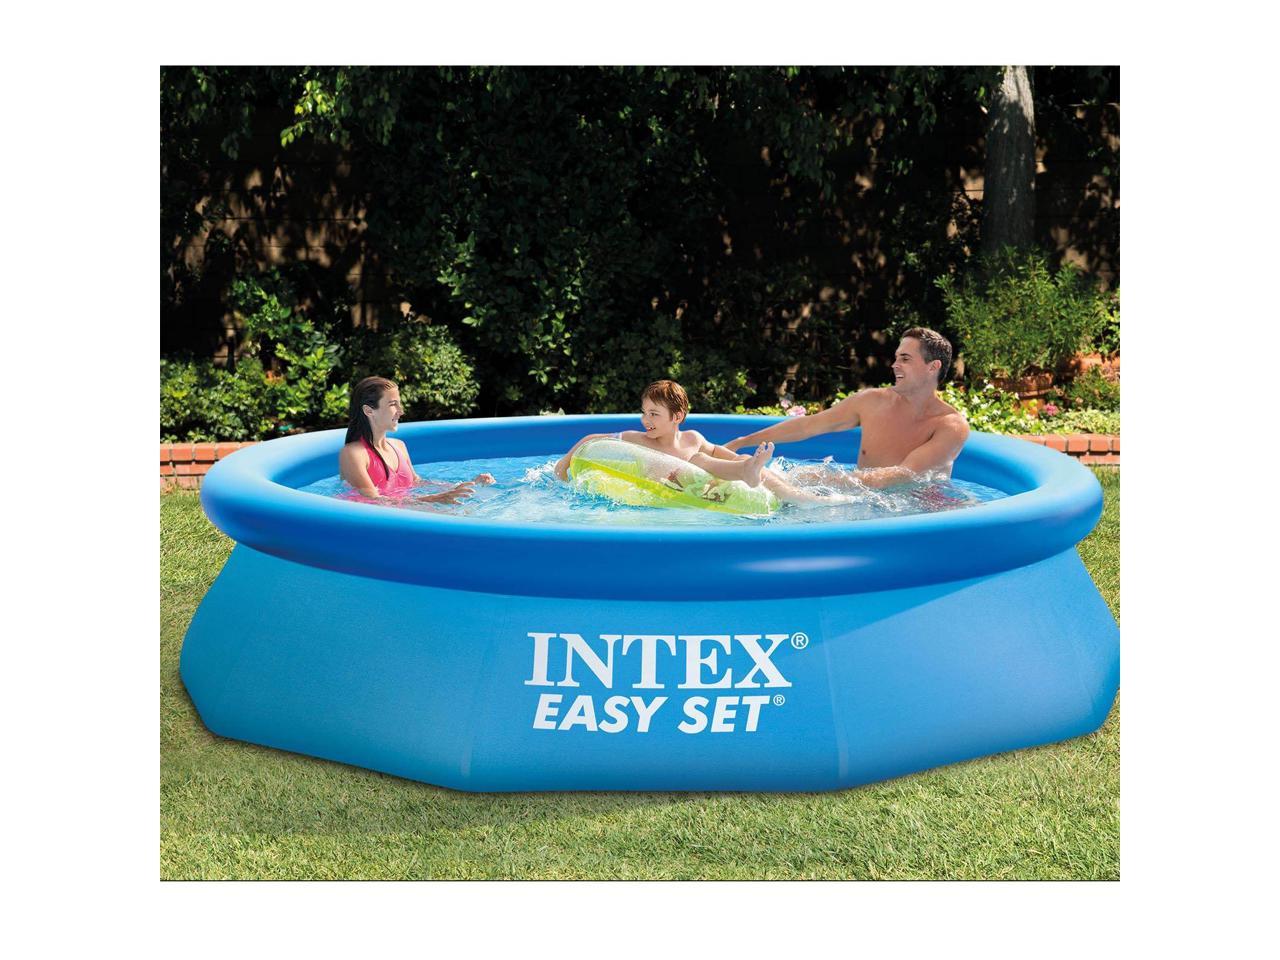 How To Vaccum Intex 10' X 30 Easy Set Above Ground Swimming Pool With Filter Pump